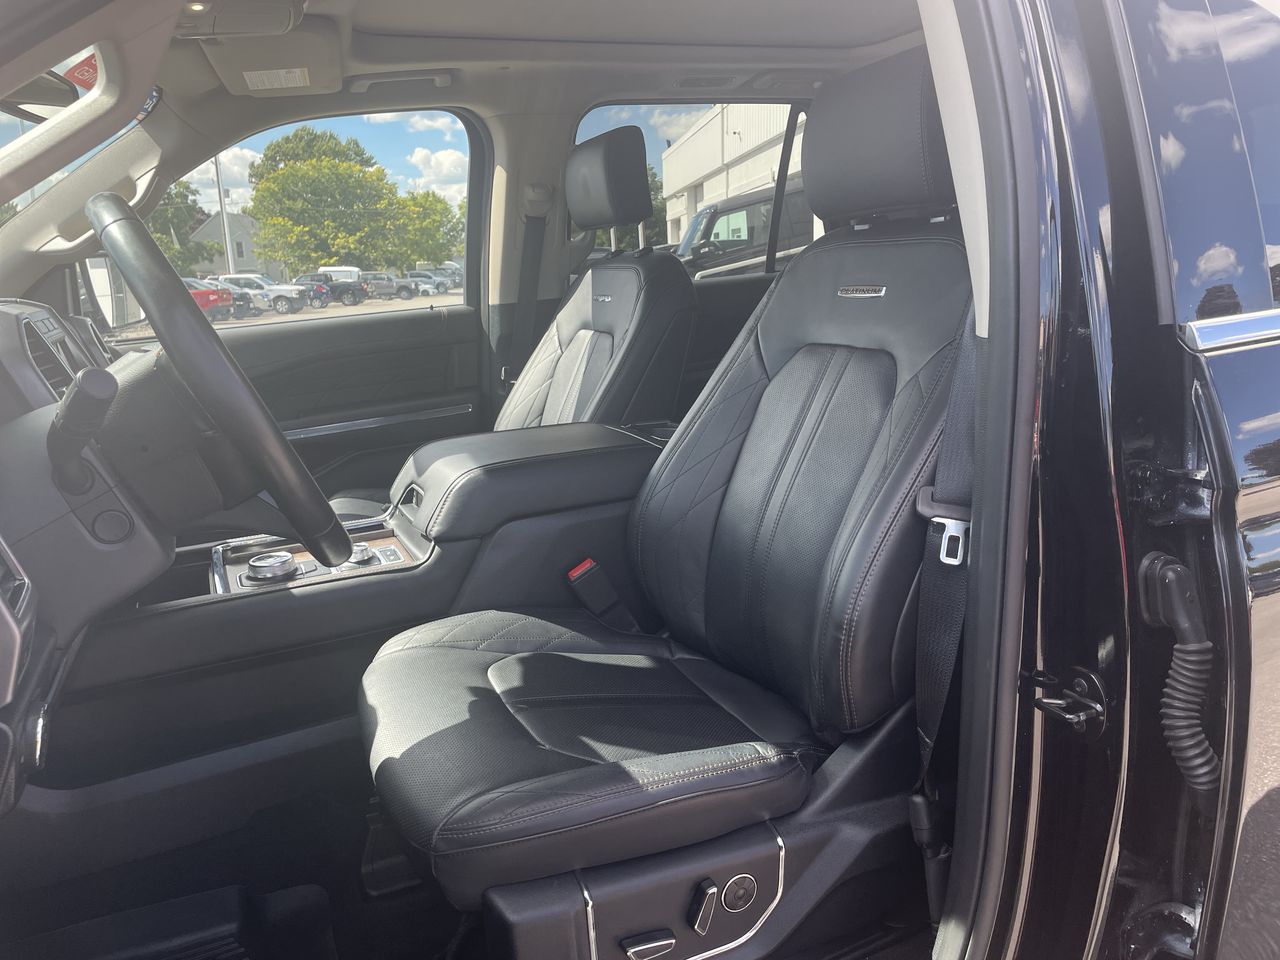 2021 Ford Expedition - P21237 Full Image 11